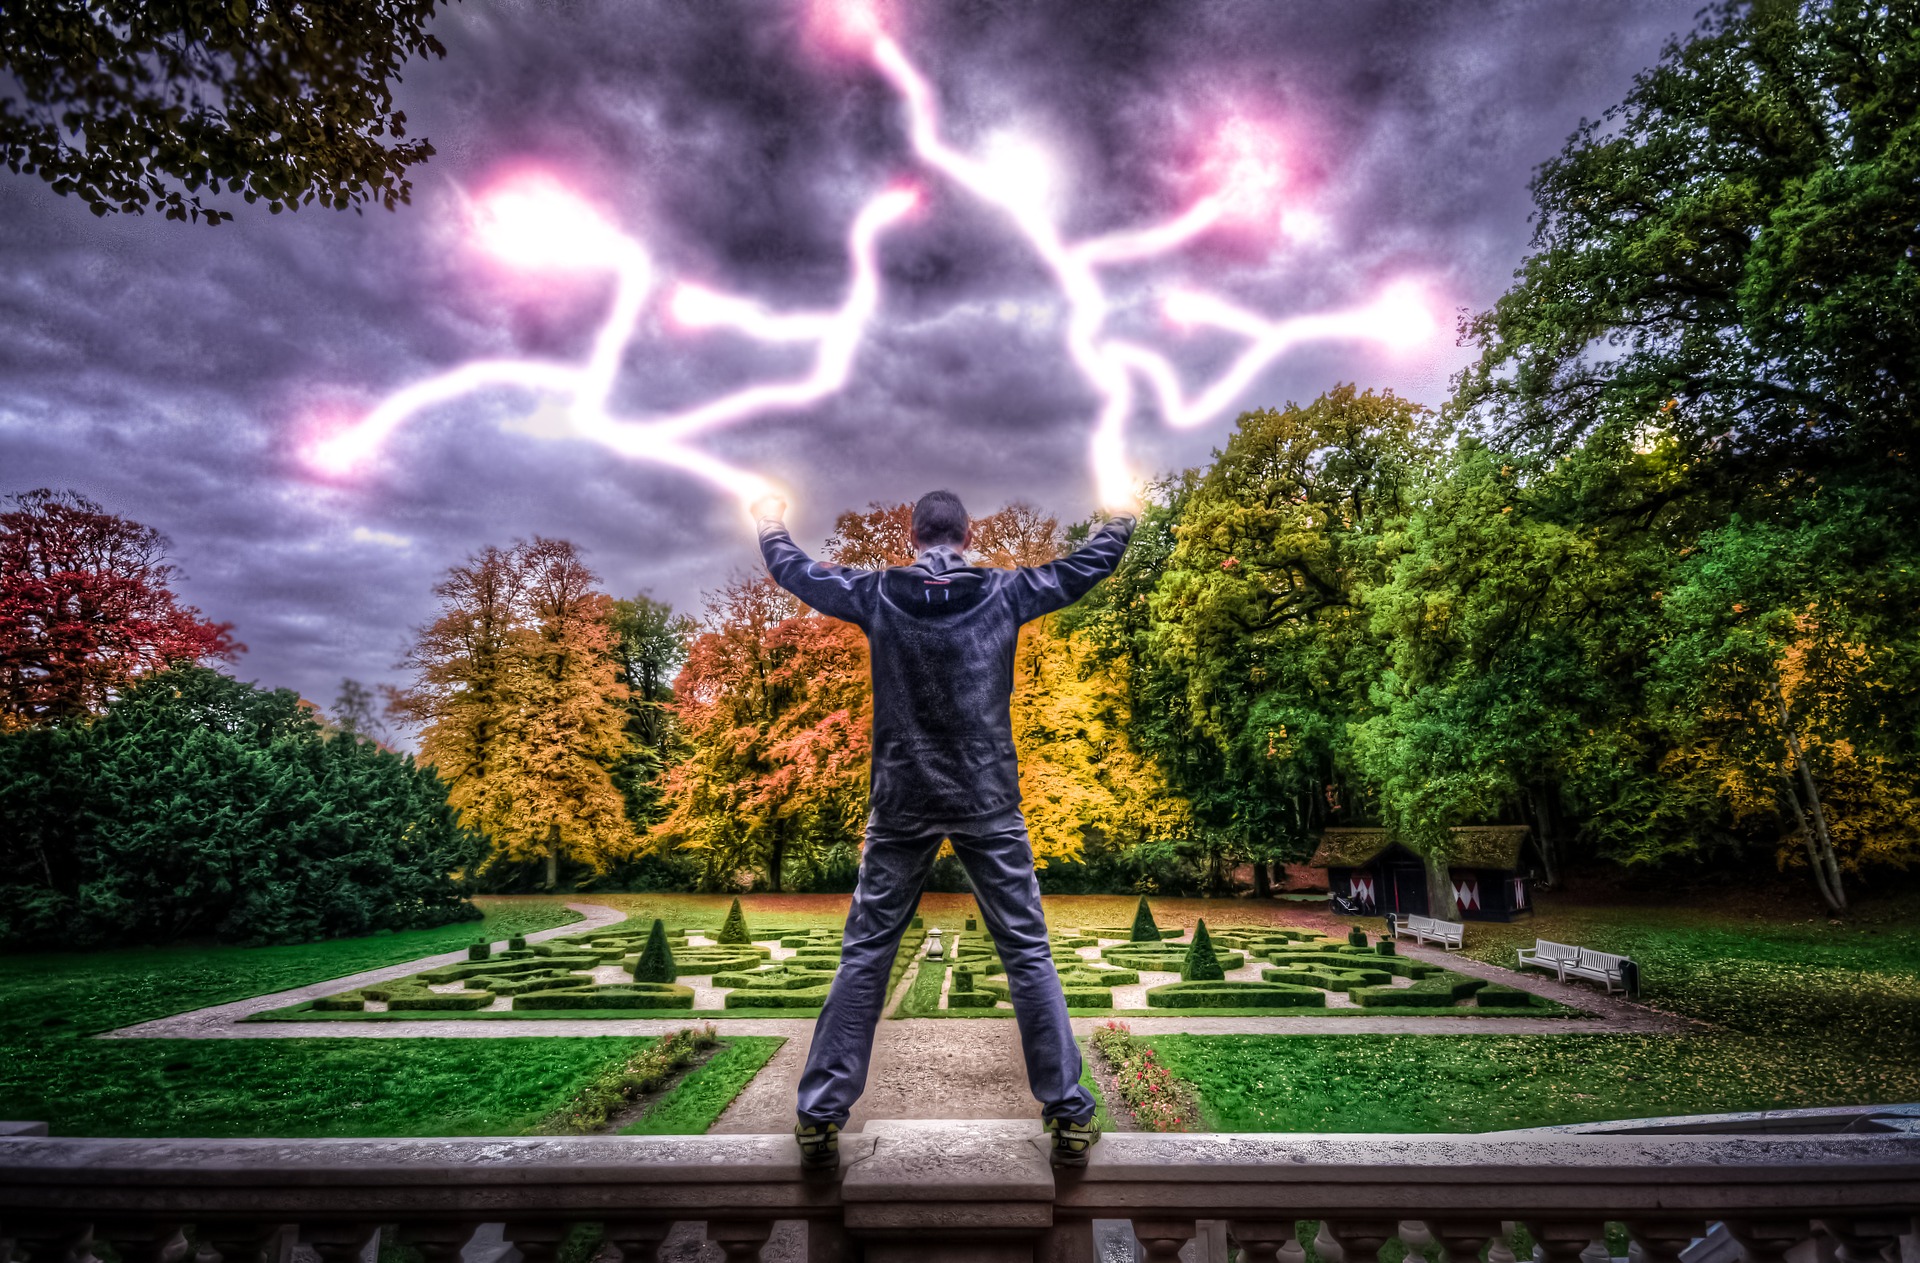 Man with Powers, Activity, Electric, Electricity, Human, HQ Photo